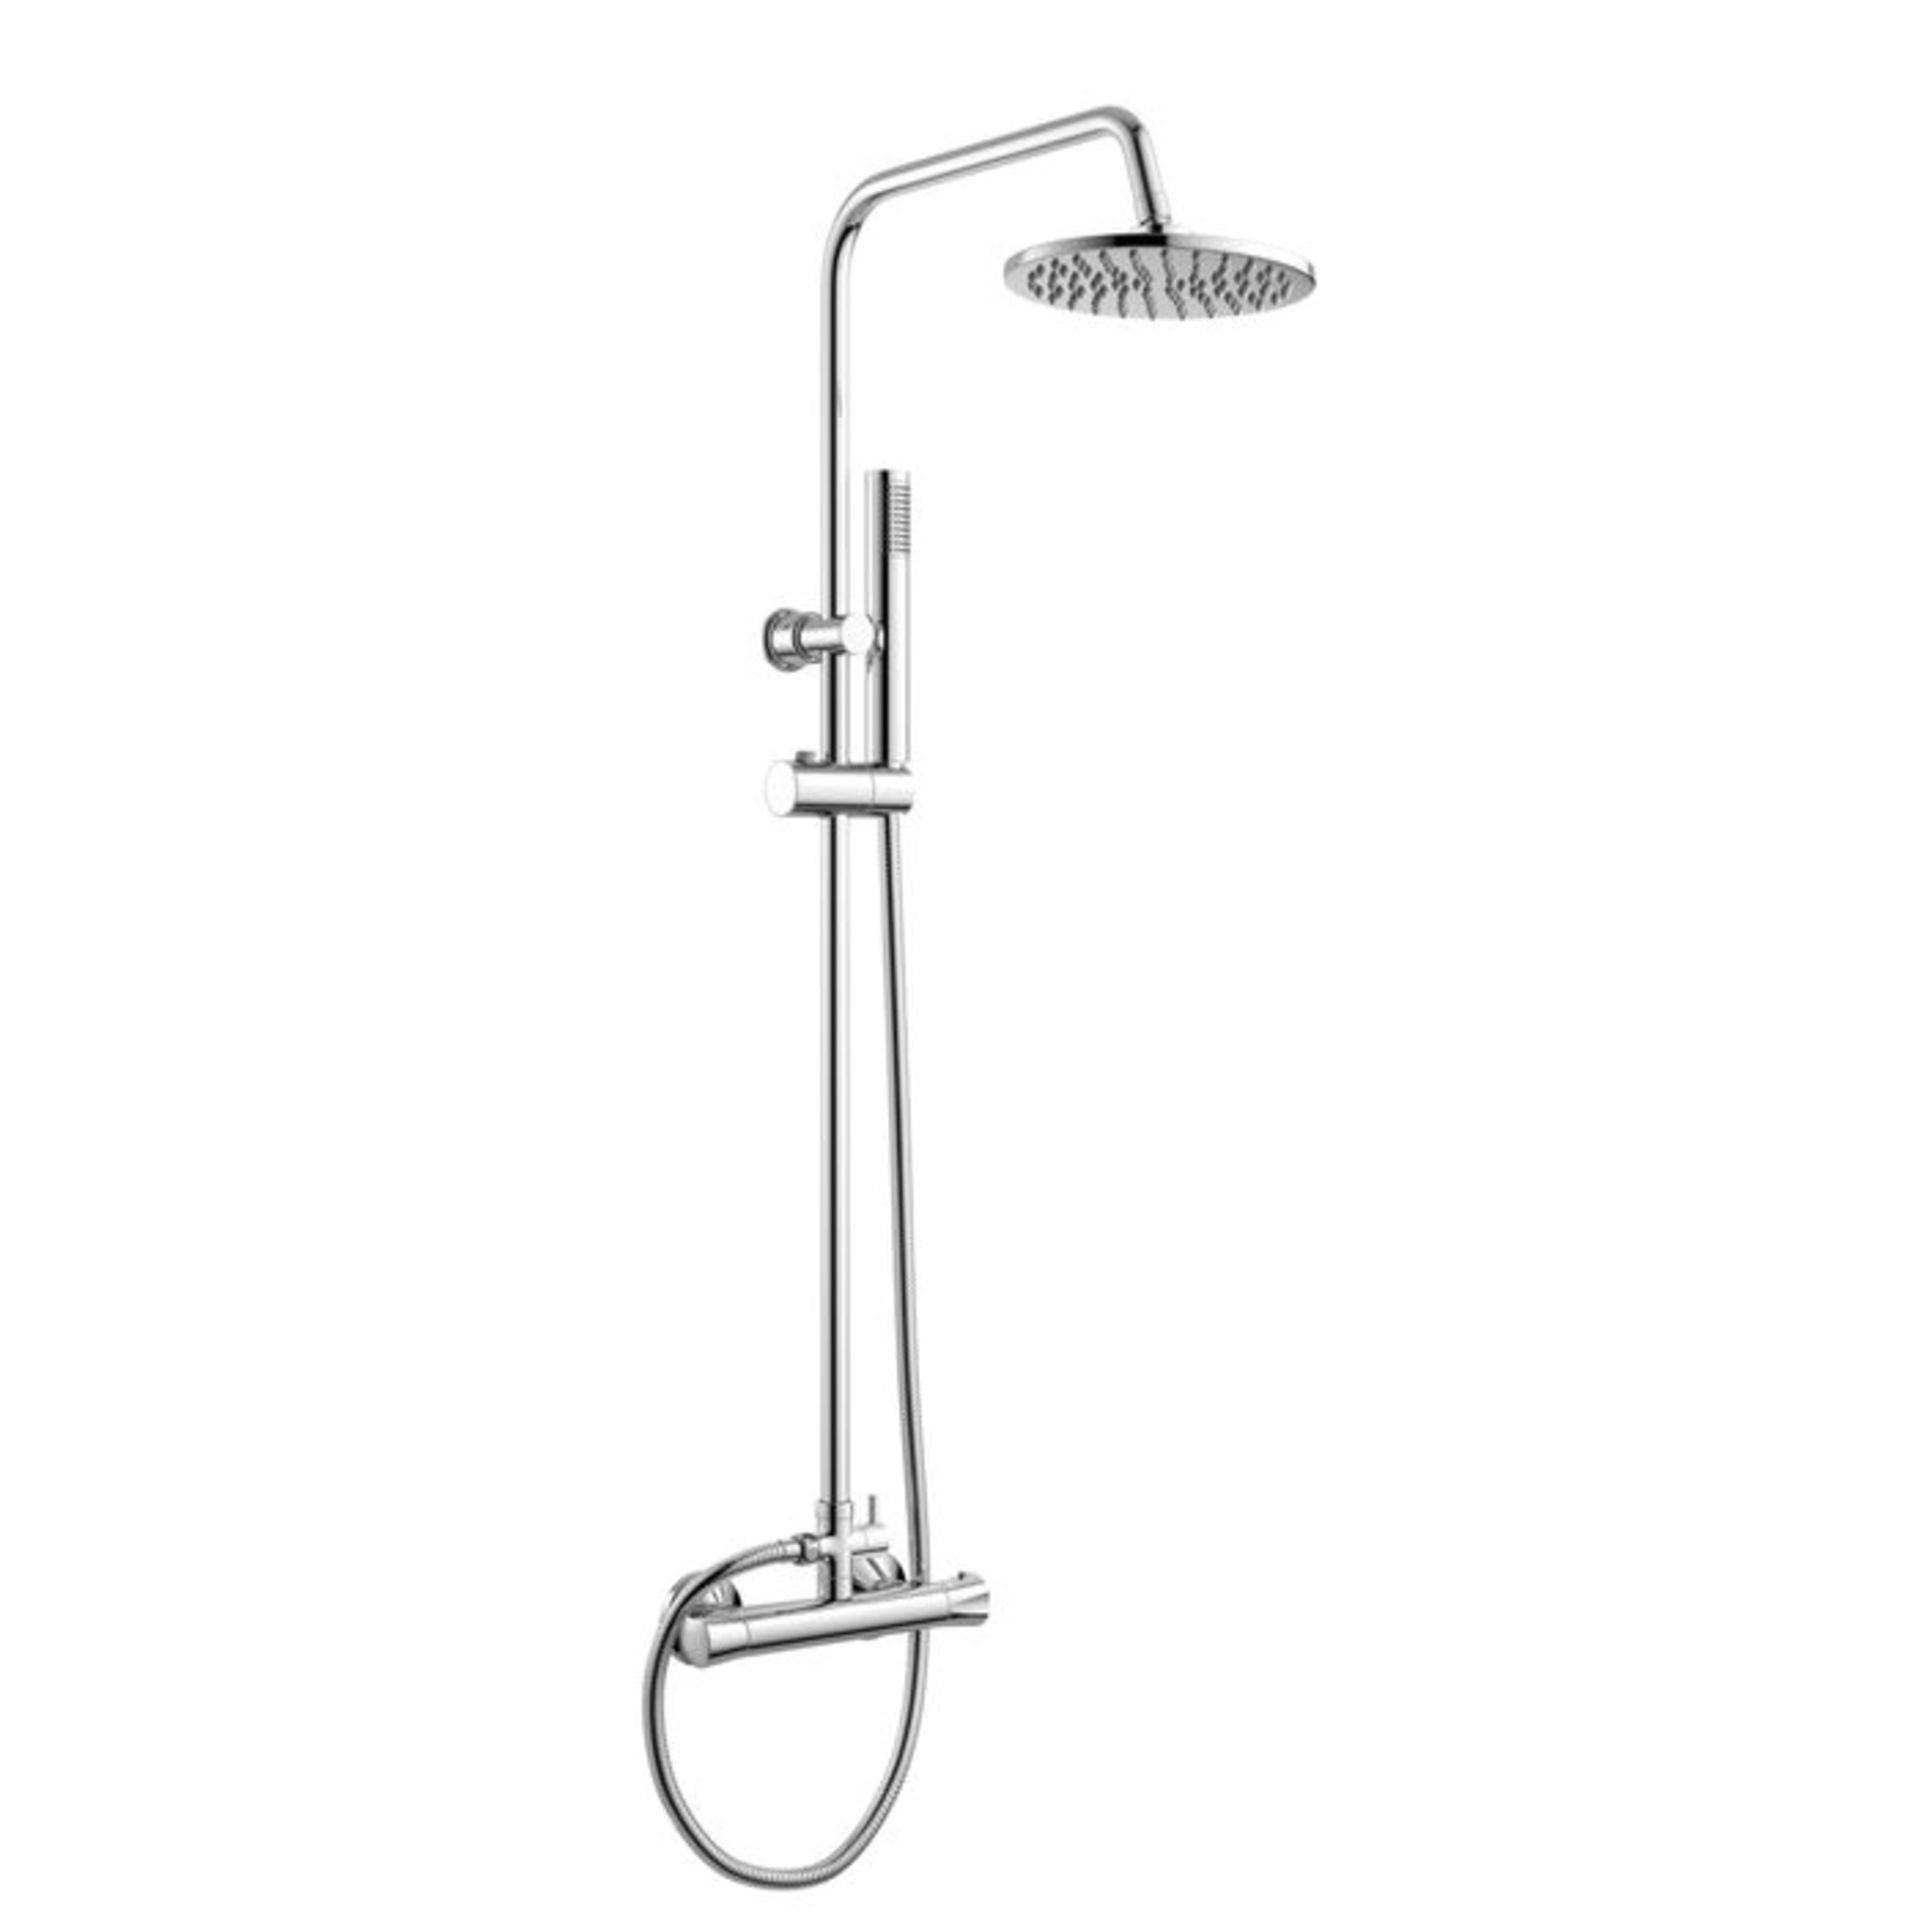 (CS93) Round Exposed Thermostatic Shower Kit & Head. Shower head features a tilt action for